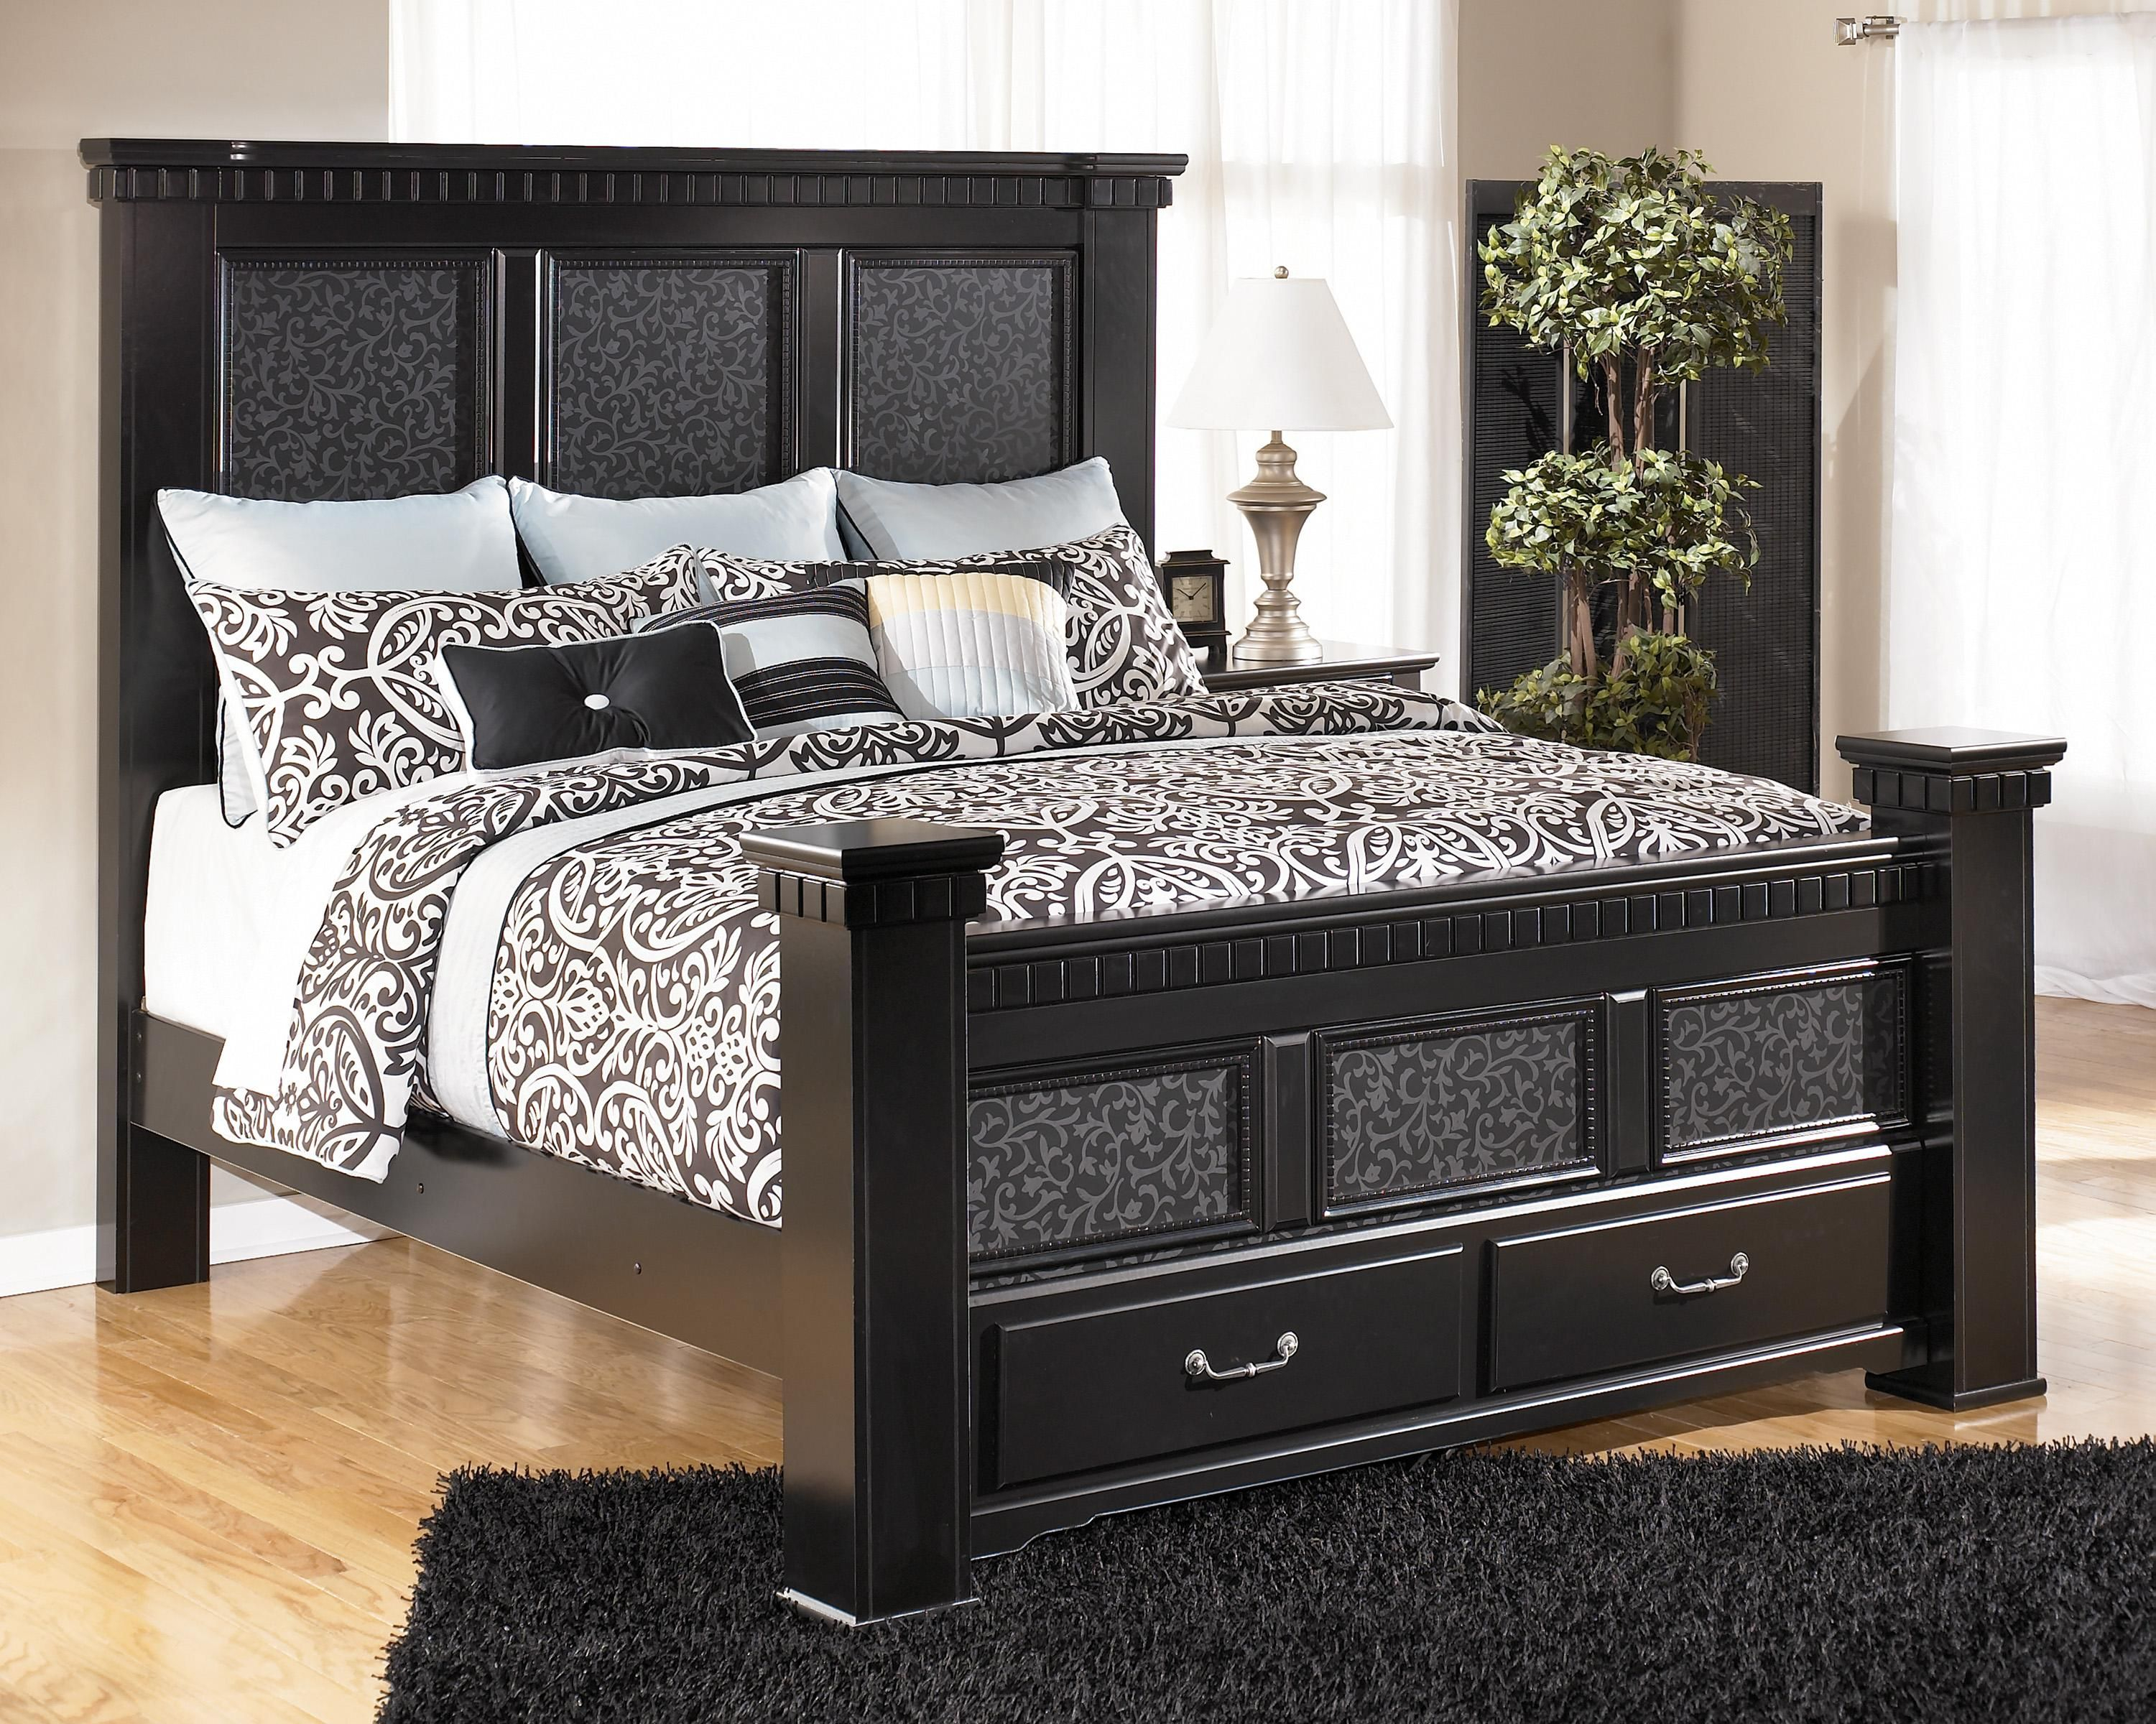 Cavallino King Mansion Bed With Storage Footboard Signature throughout sizing 3001 X 2400